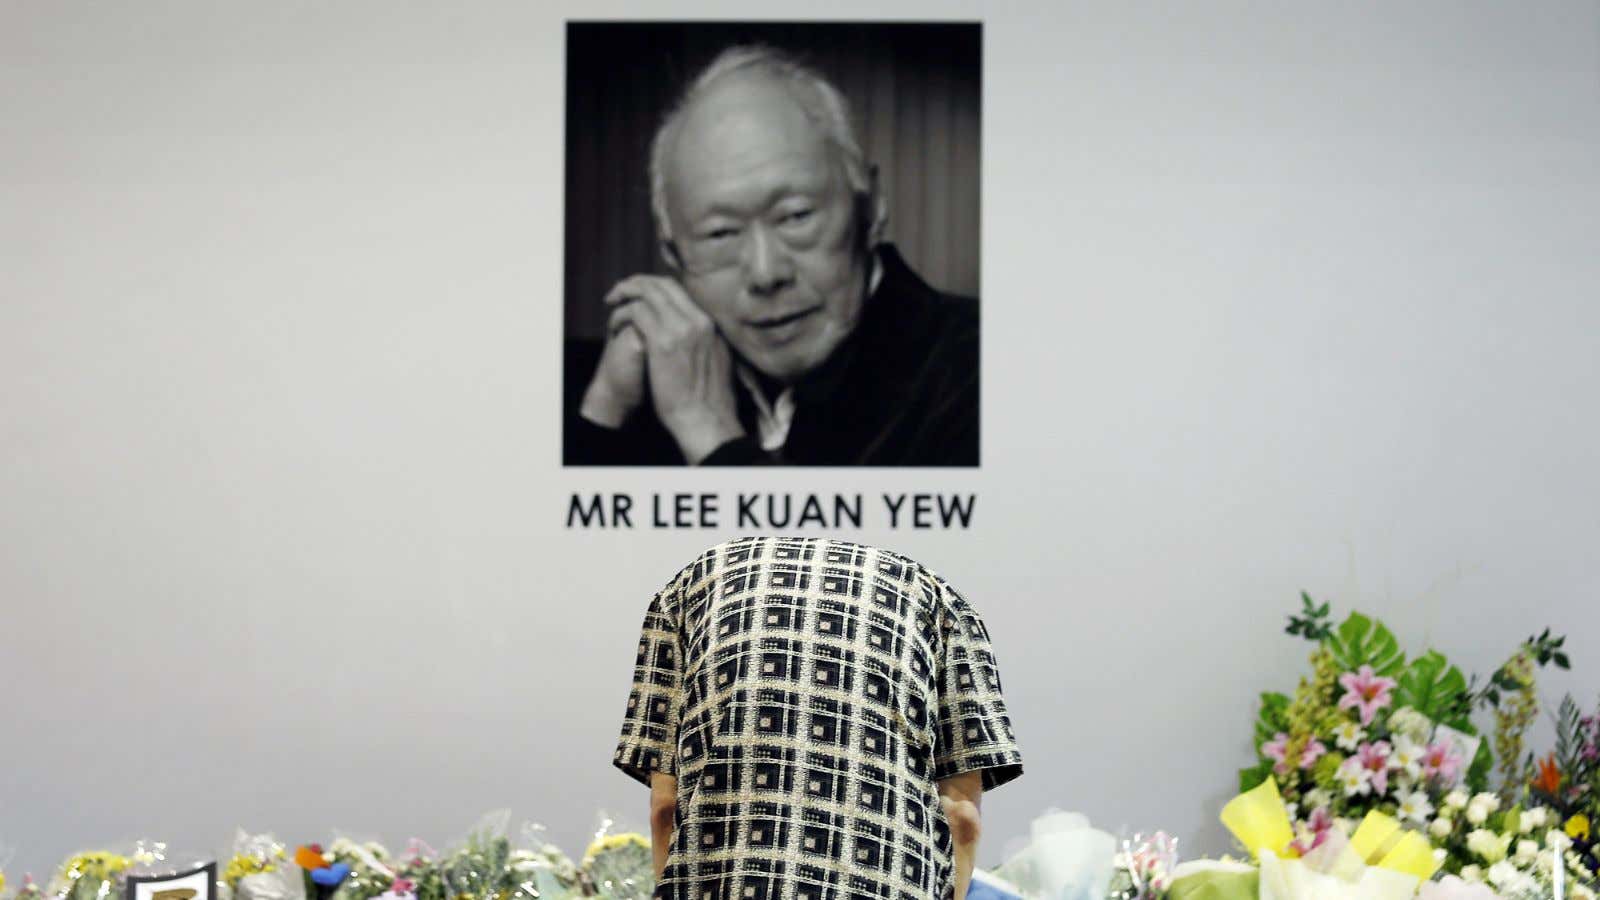 Thank you, LKY.